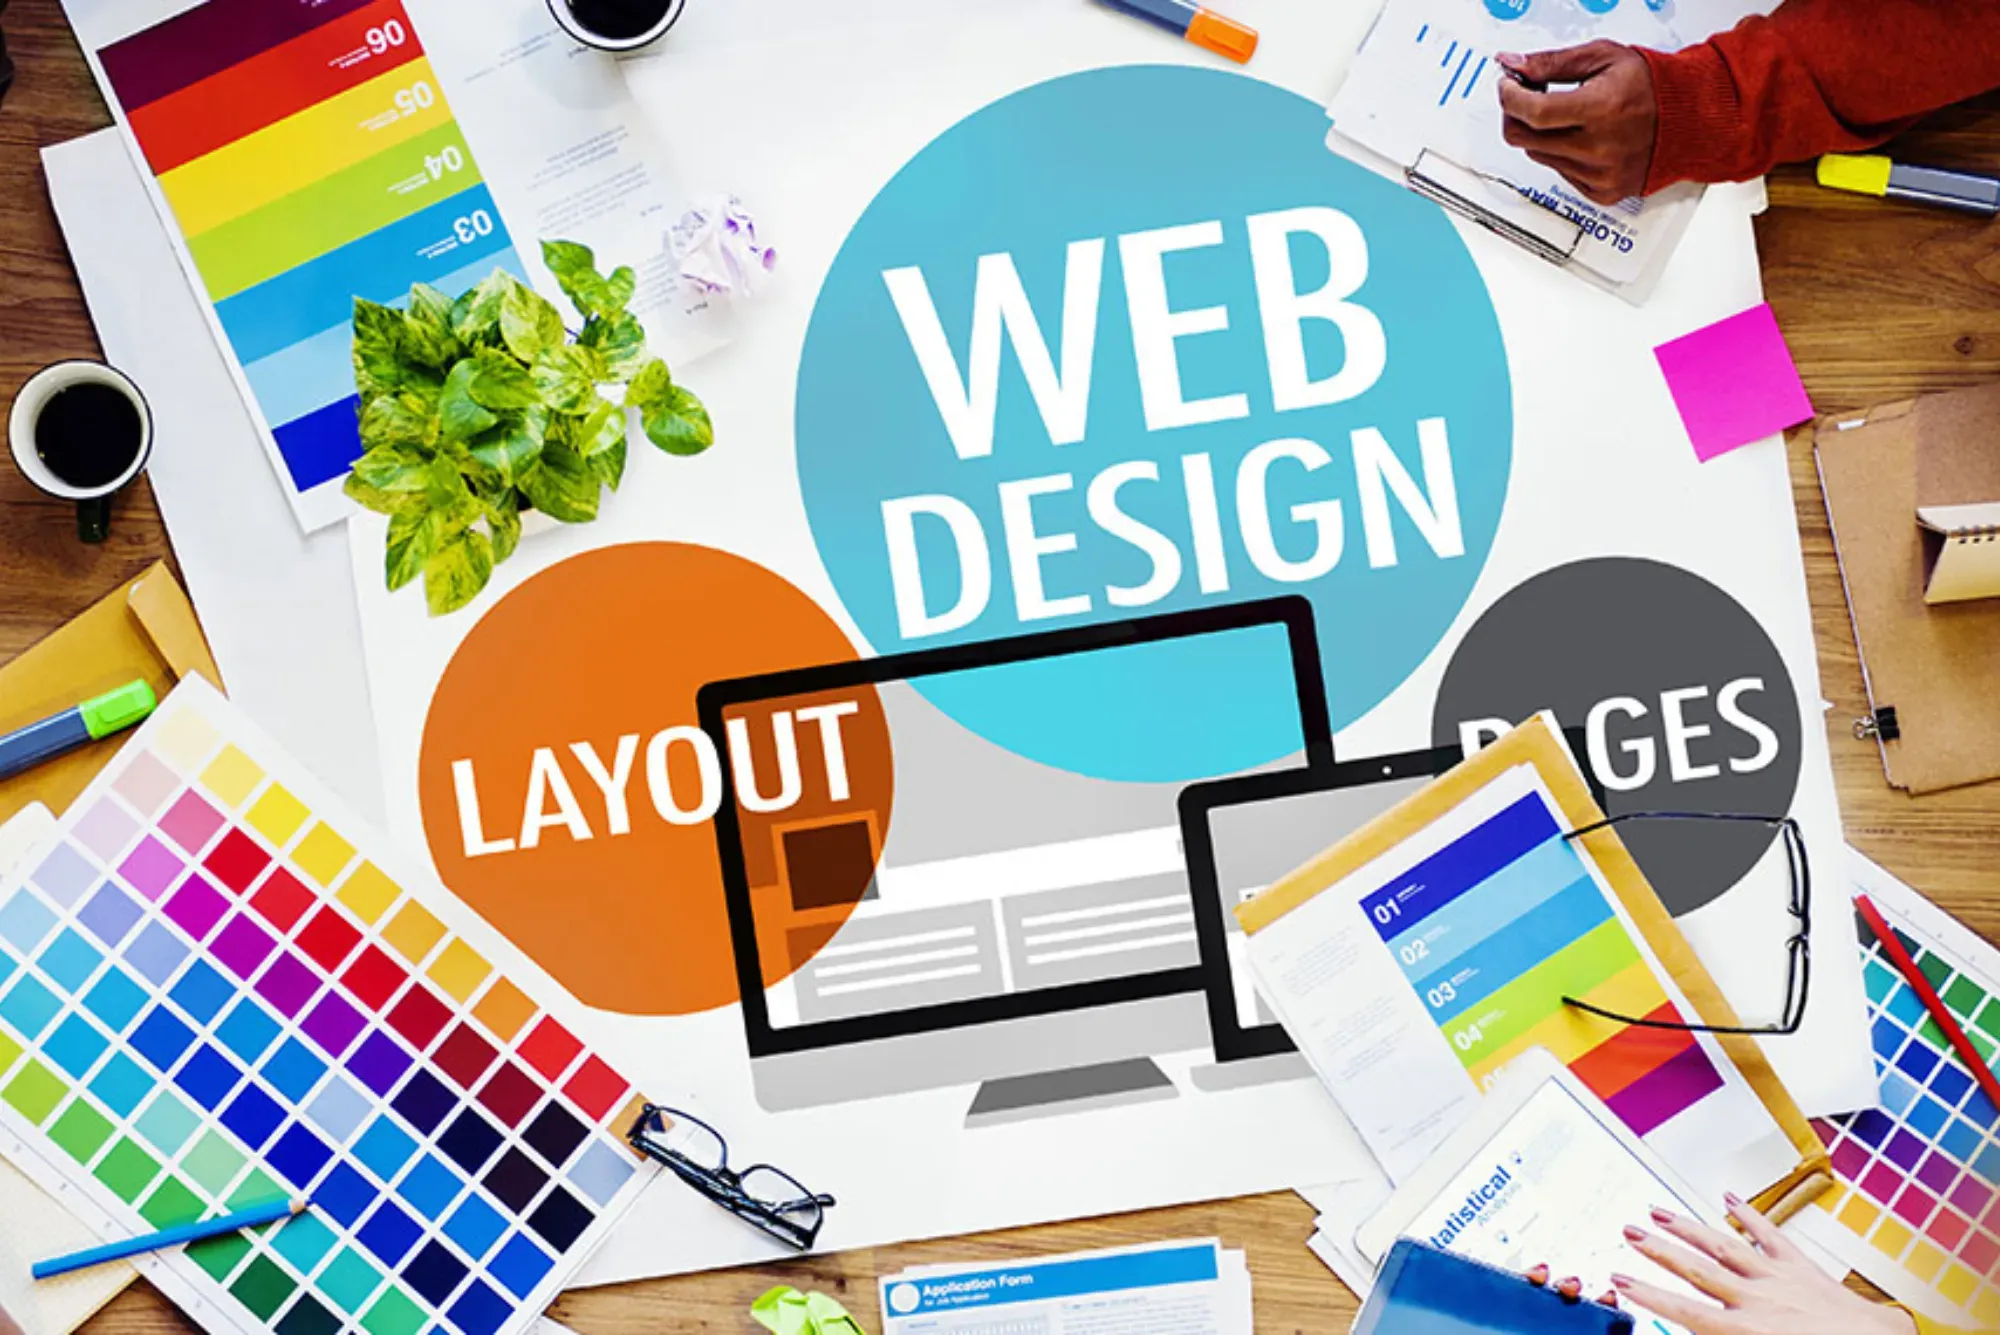 Web Design Tips from Industry Experts